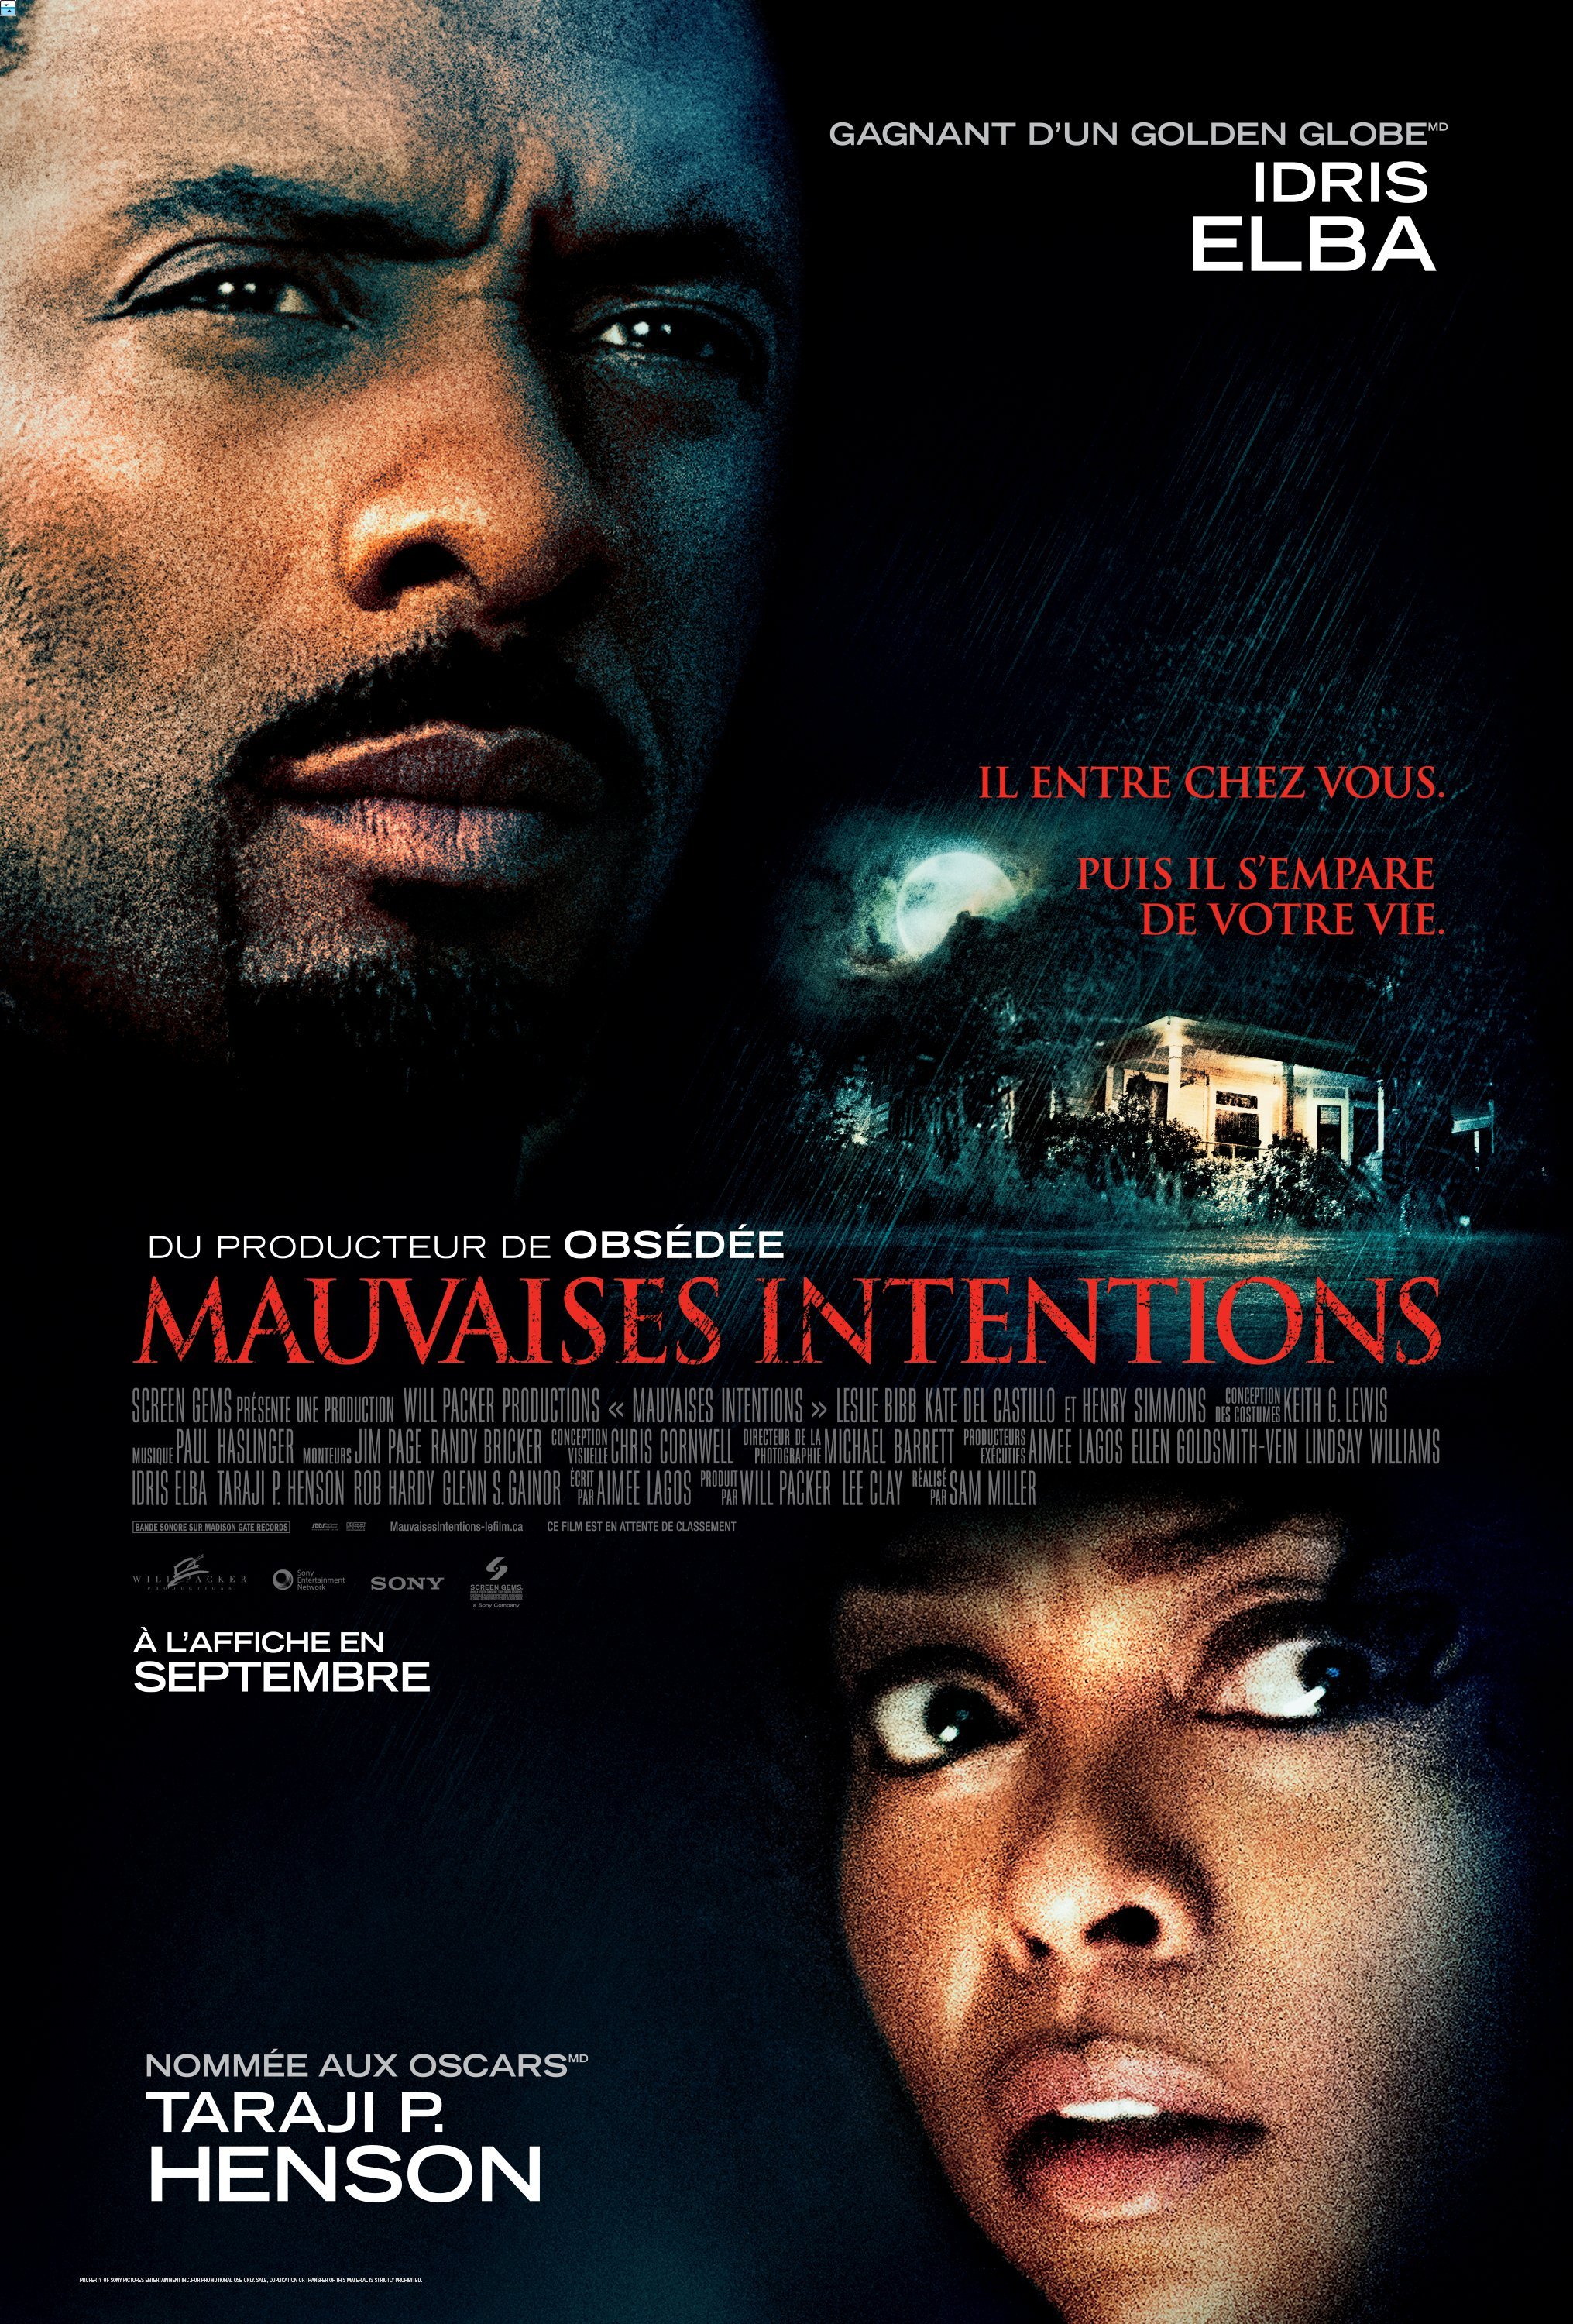 Poster of the movie Mauvaises intentions